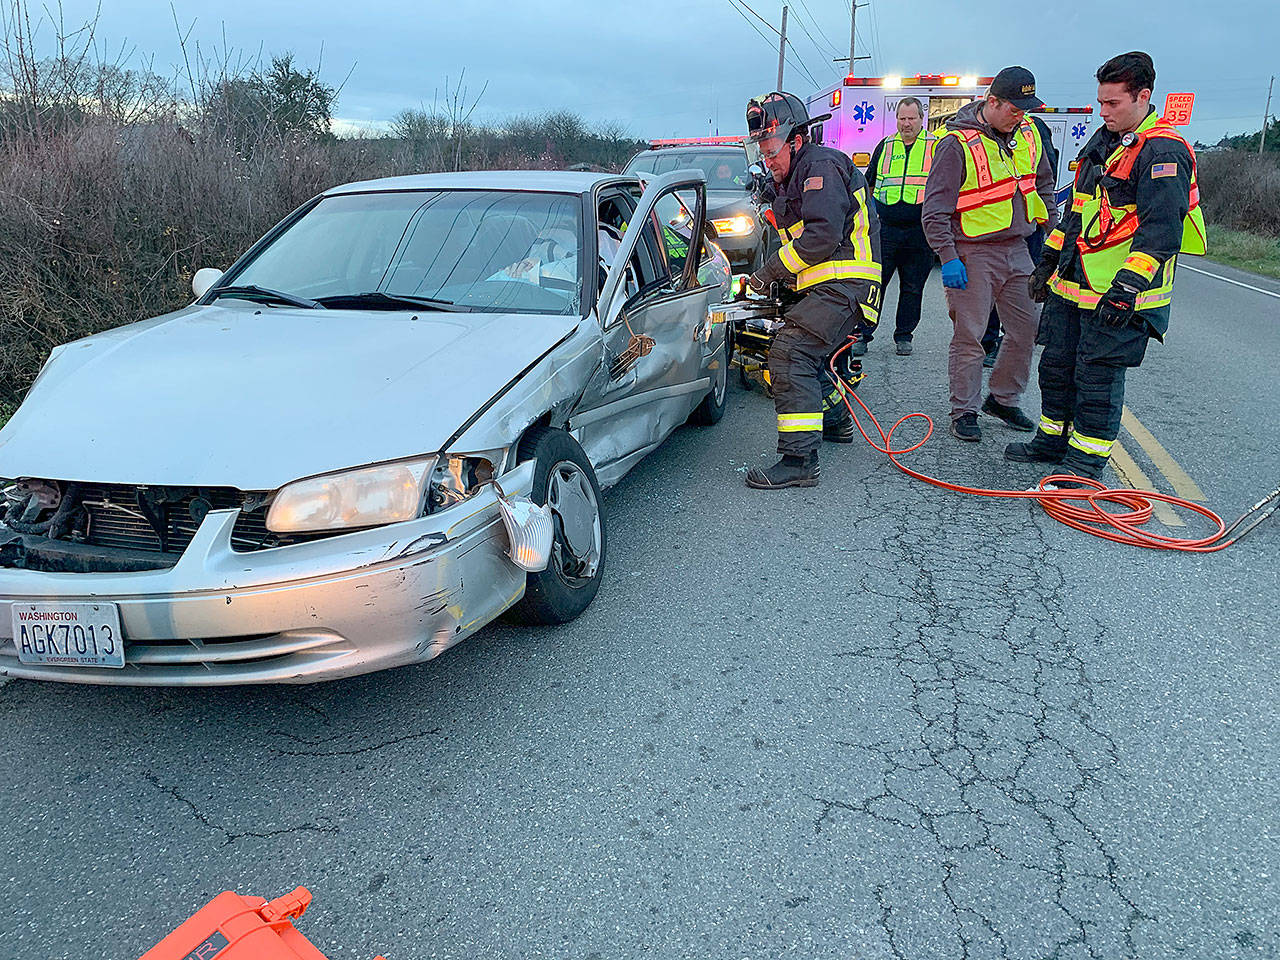 Apparatus Operator Ed Pratt, of Central Whidbey Island Fire and Rescue, uses a hydraulic rescue tool to remove a door from the heavily damaged door of a sedan involved in a hit-and-run accident Thursday. Photo provided by Central Whidbey Island Fire and Rescue